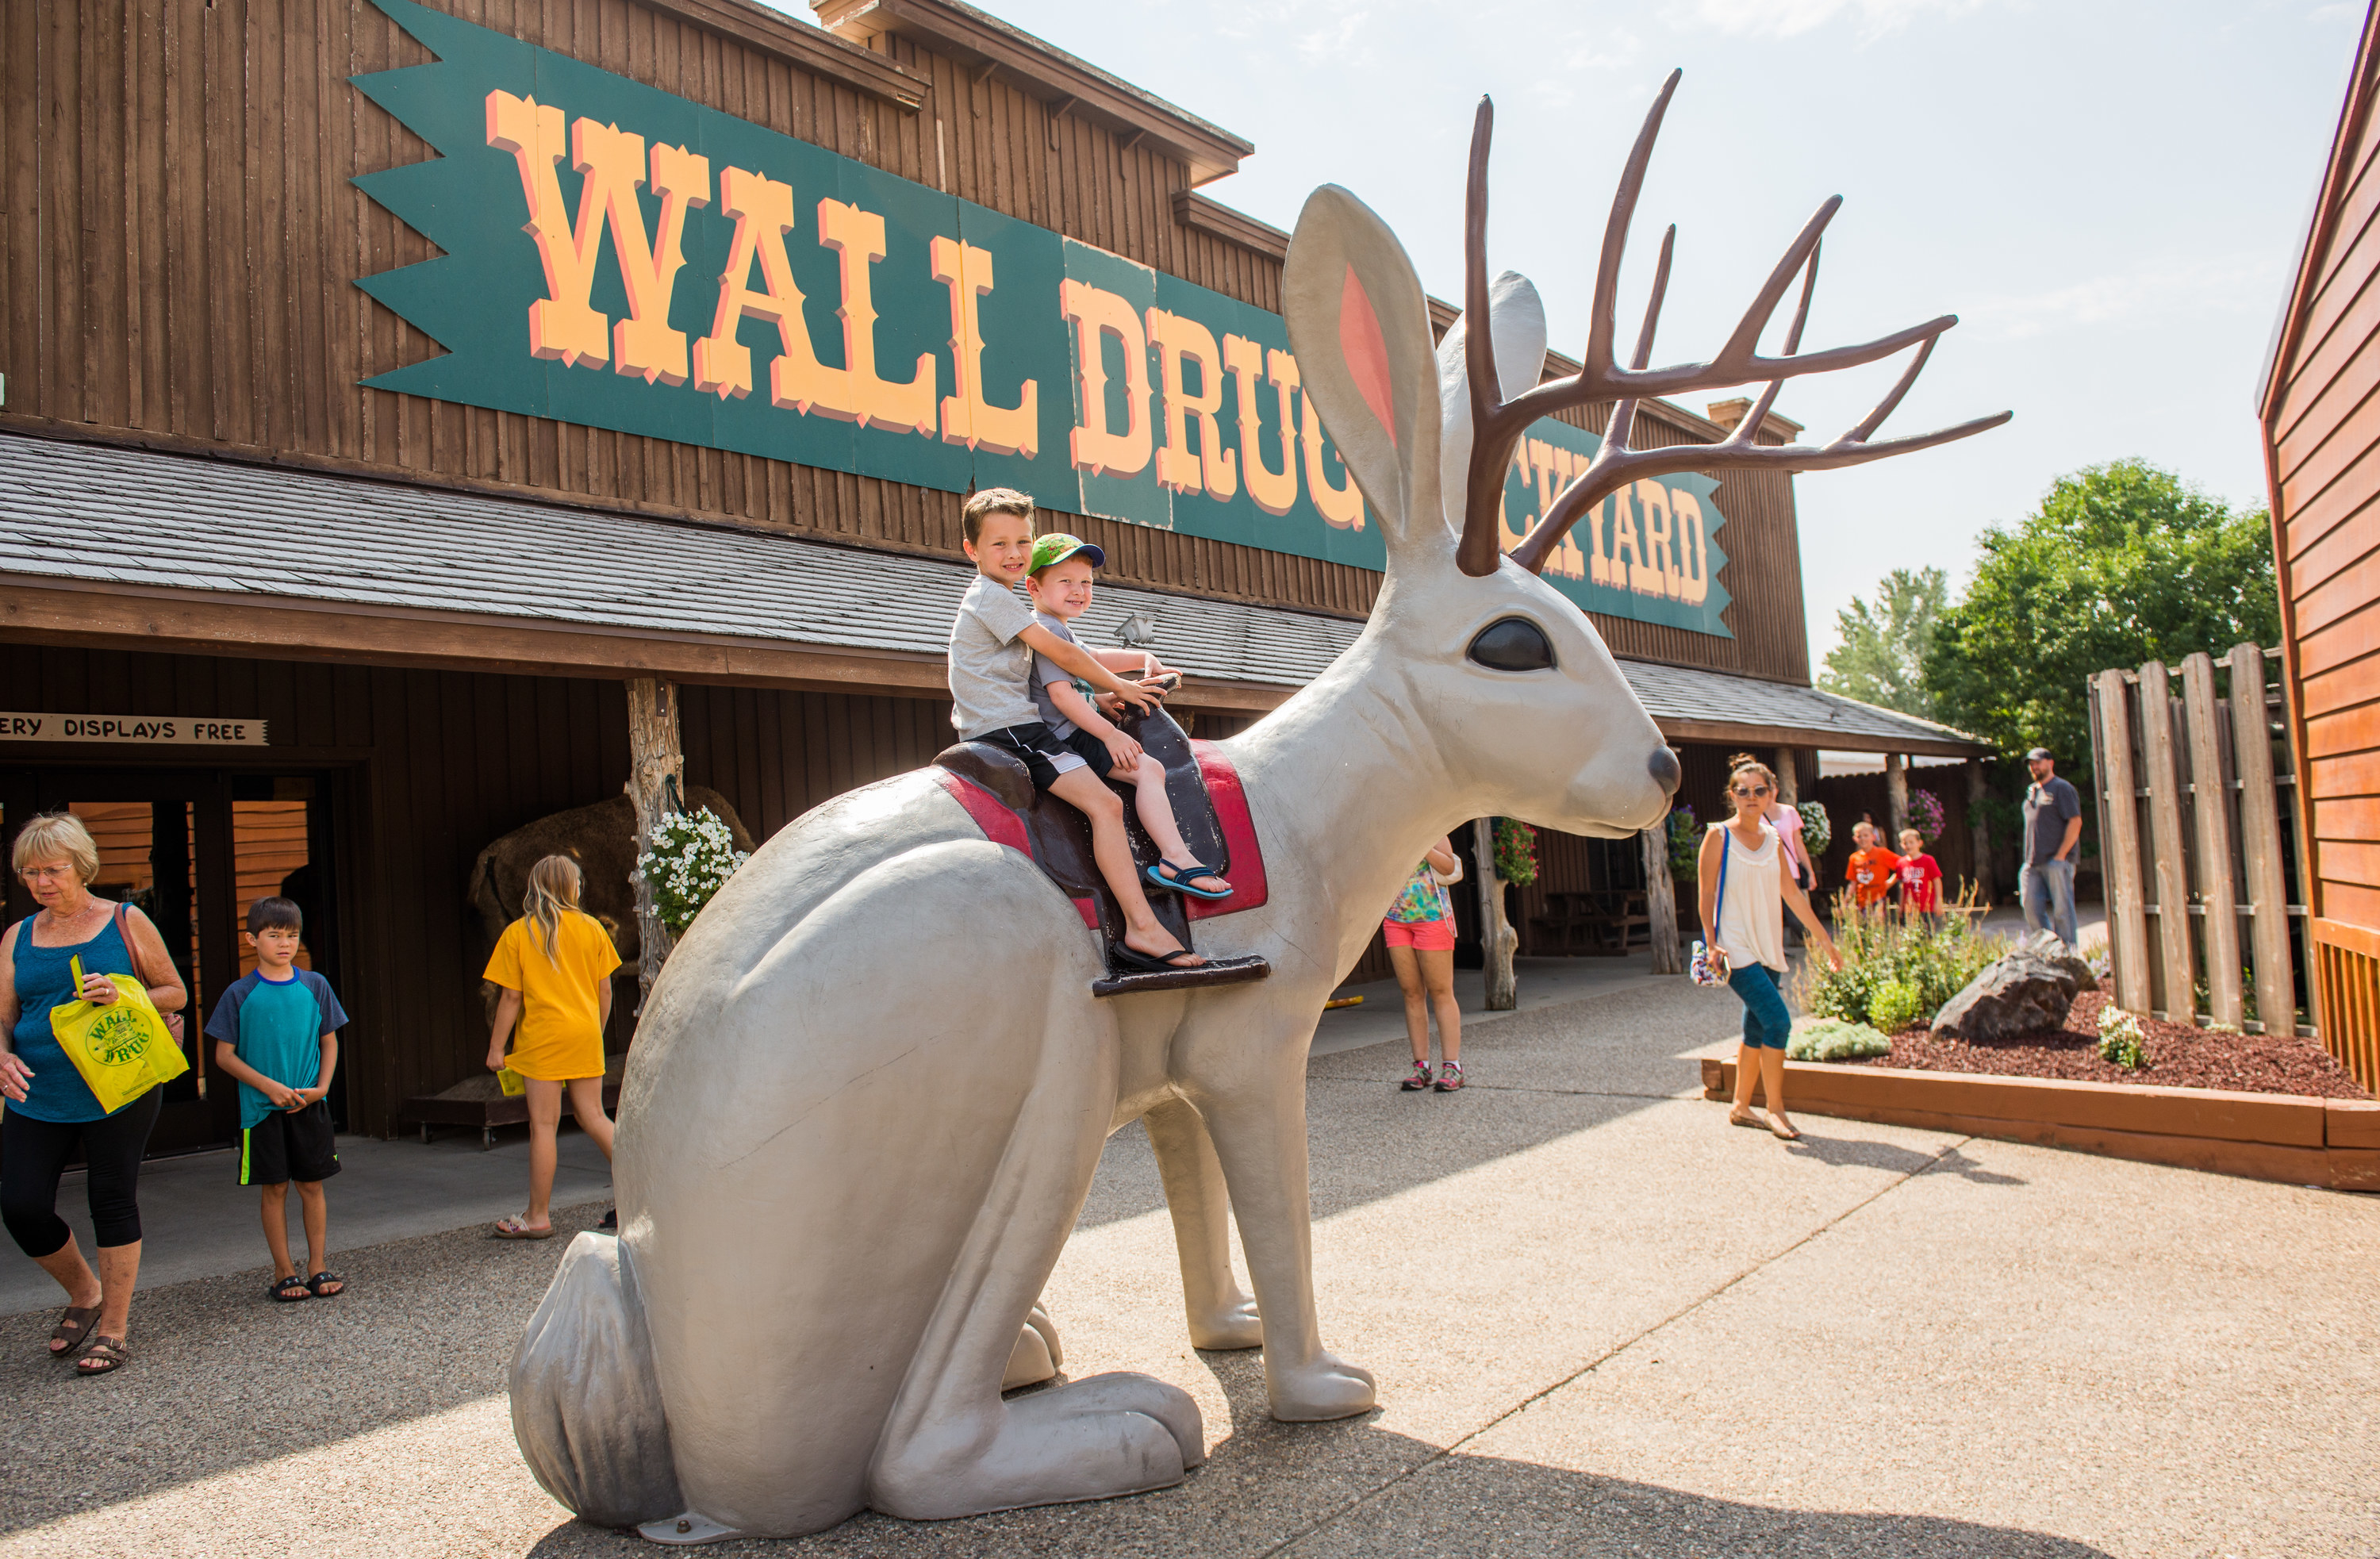 Kids on a statue of a jackalope in front of storefront that says &quot;Wall Drug&quot;